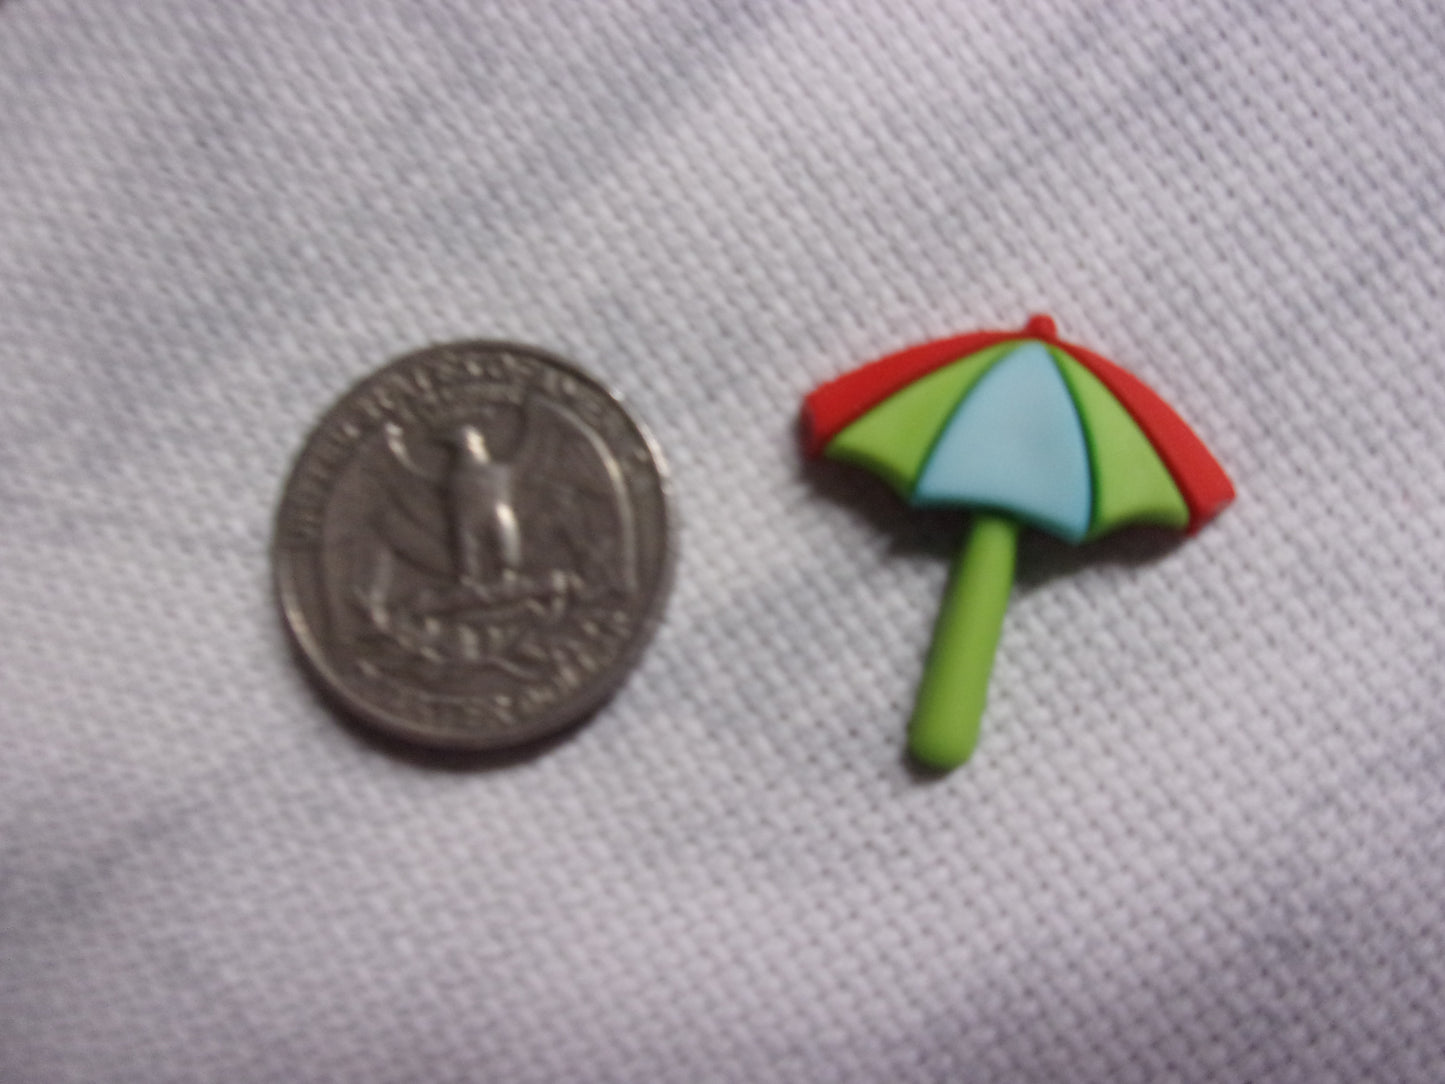 At The Beach needle minders